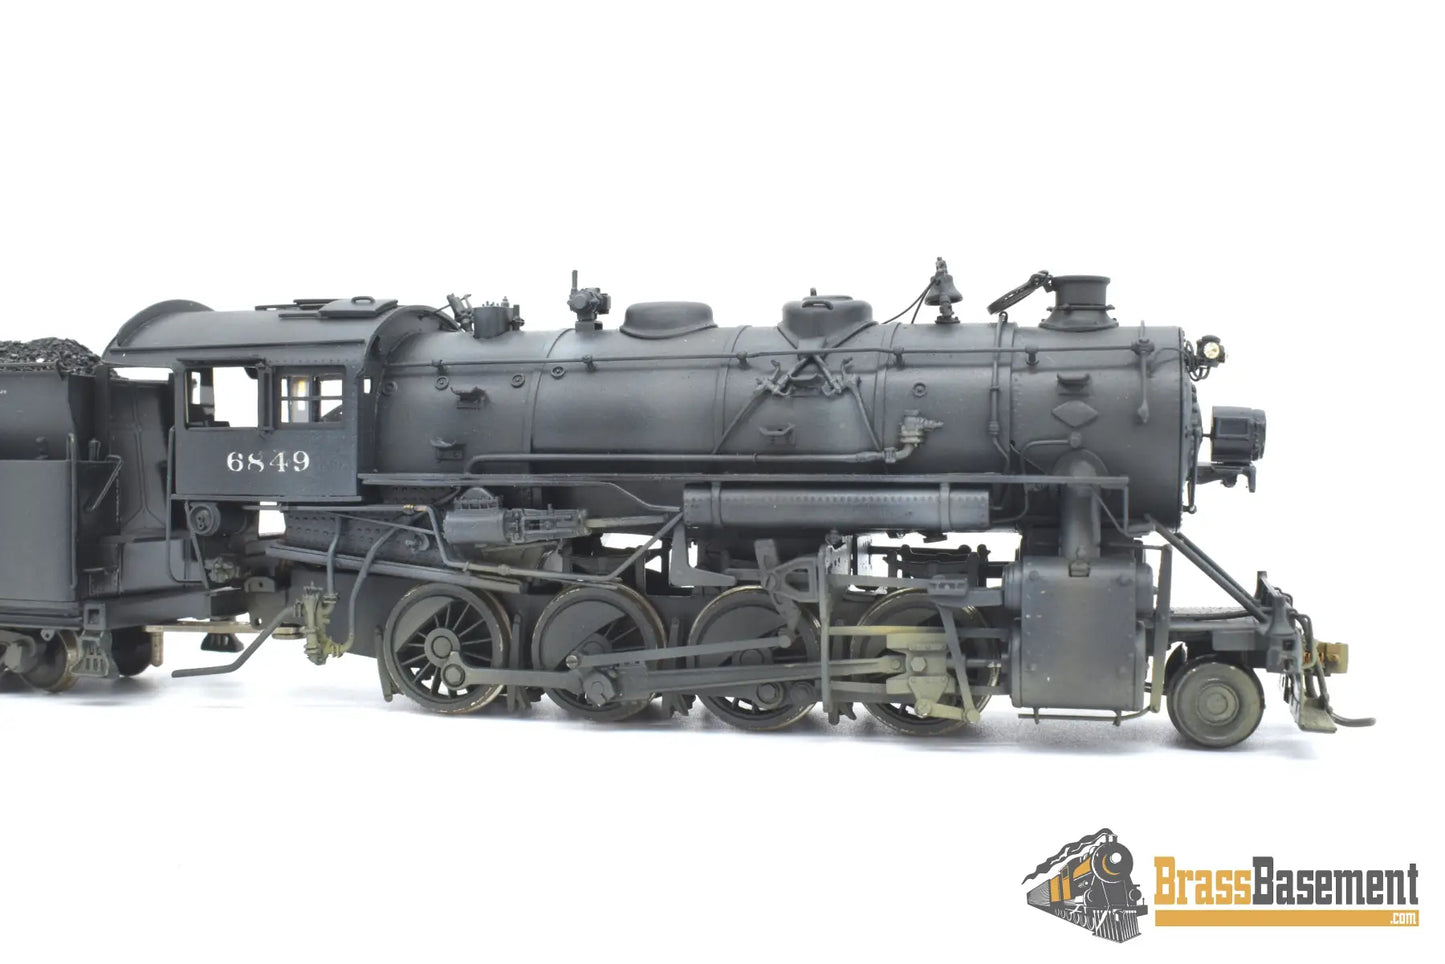 Ho Brass - Alco New York Central Nyc G - 46H 2 - 8 - 0 #6849 Pro Paint Steam